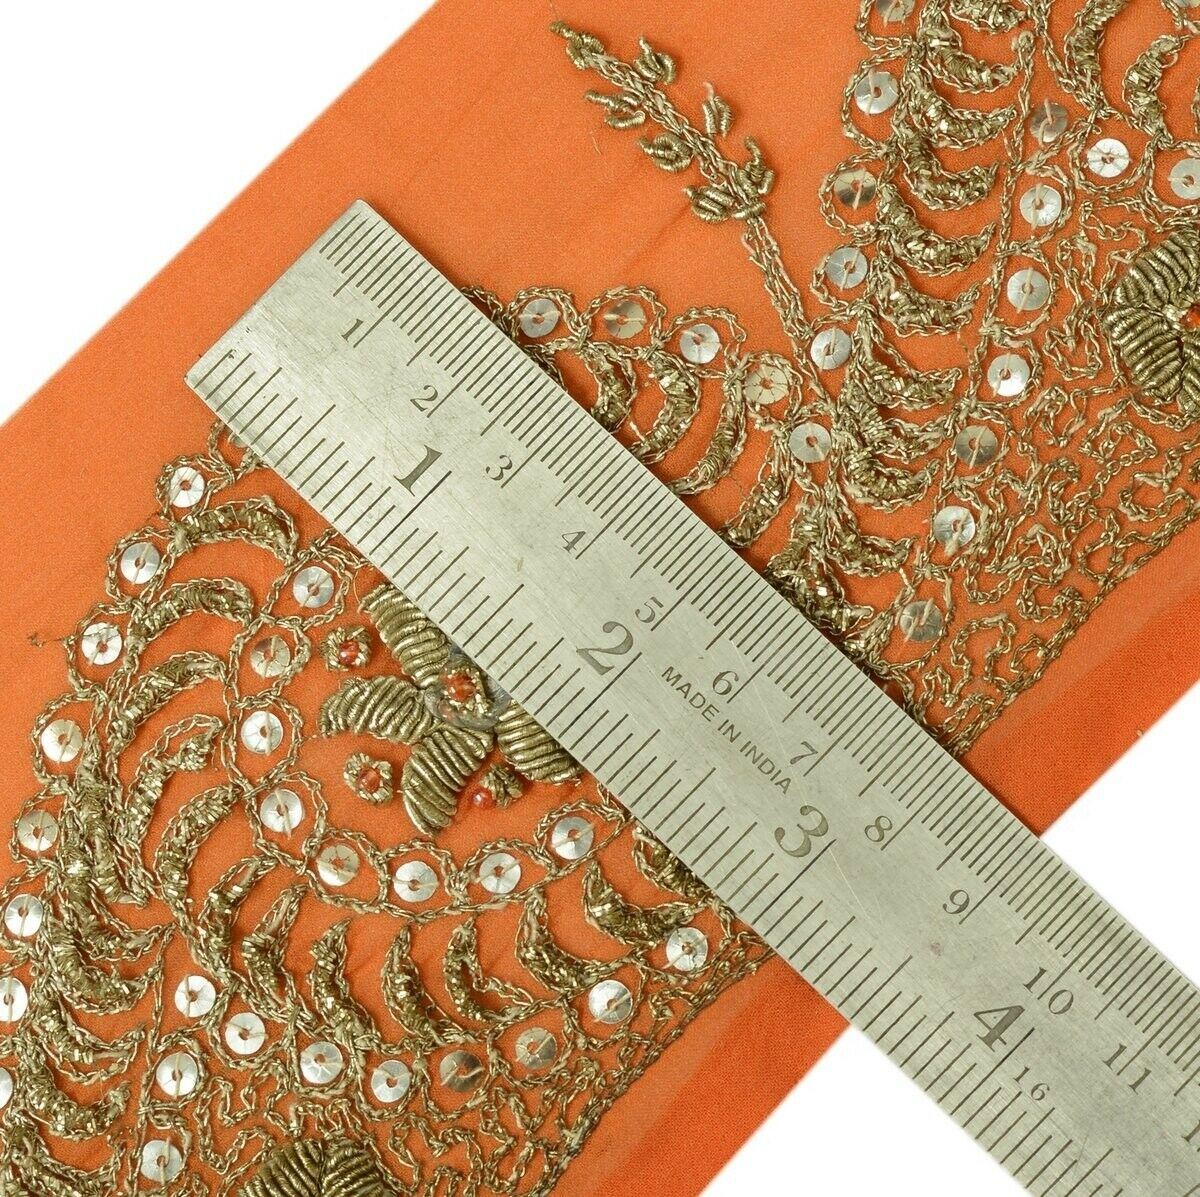 Vintage Sari Border Indian Craft Trim Hand Beaded Embroidered Sewing Lace Rust